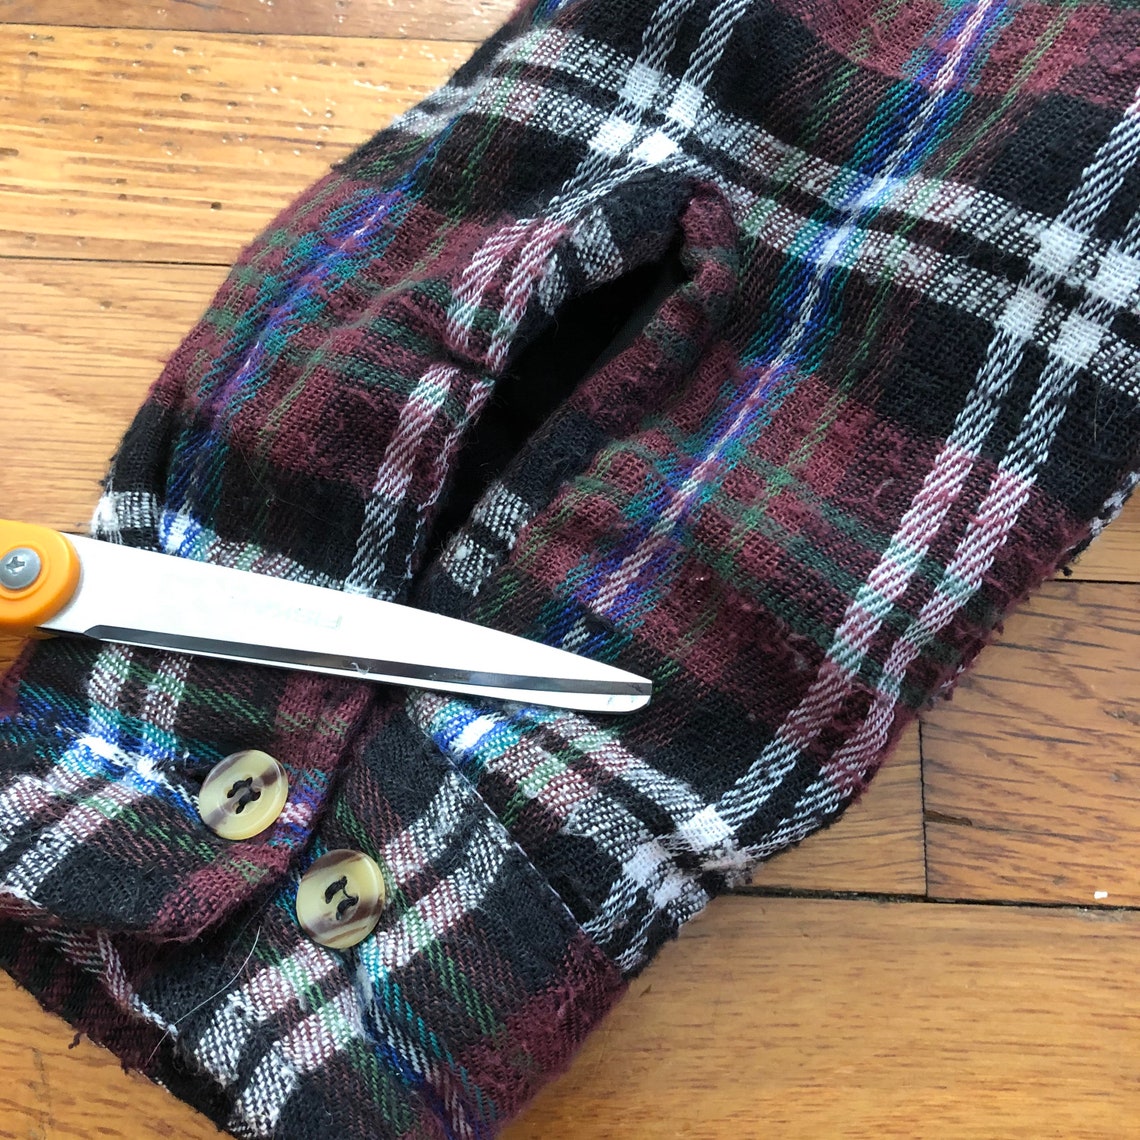 Btc flannel discovery channel bitcoin